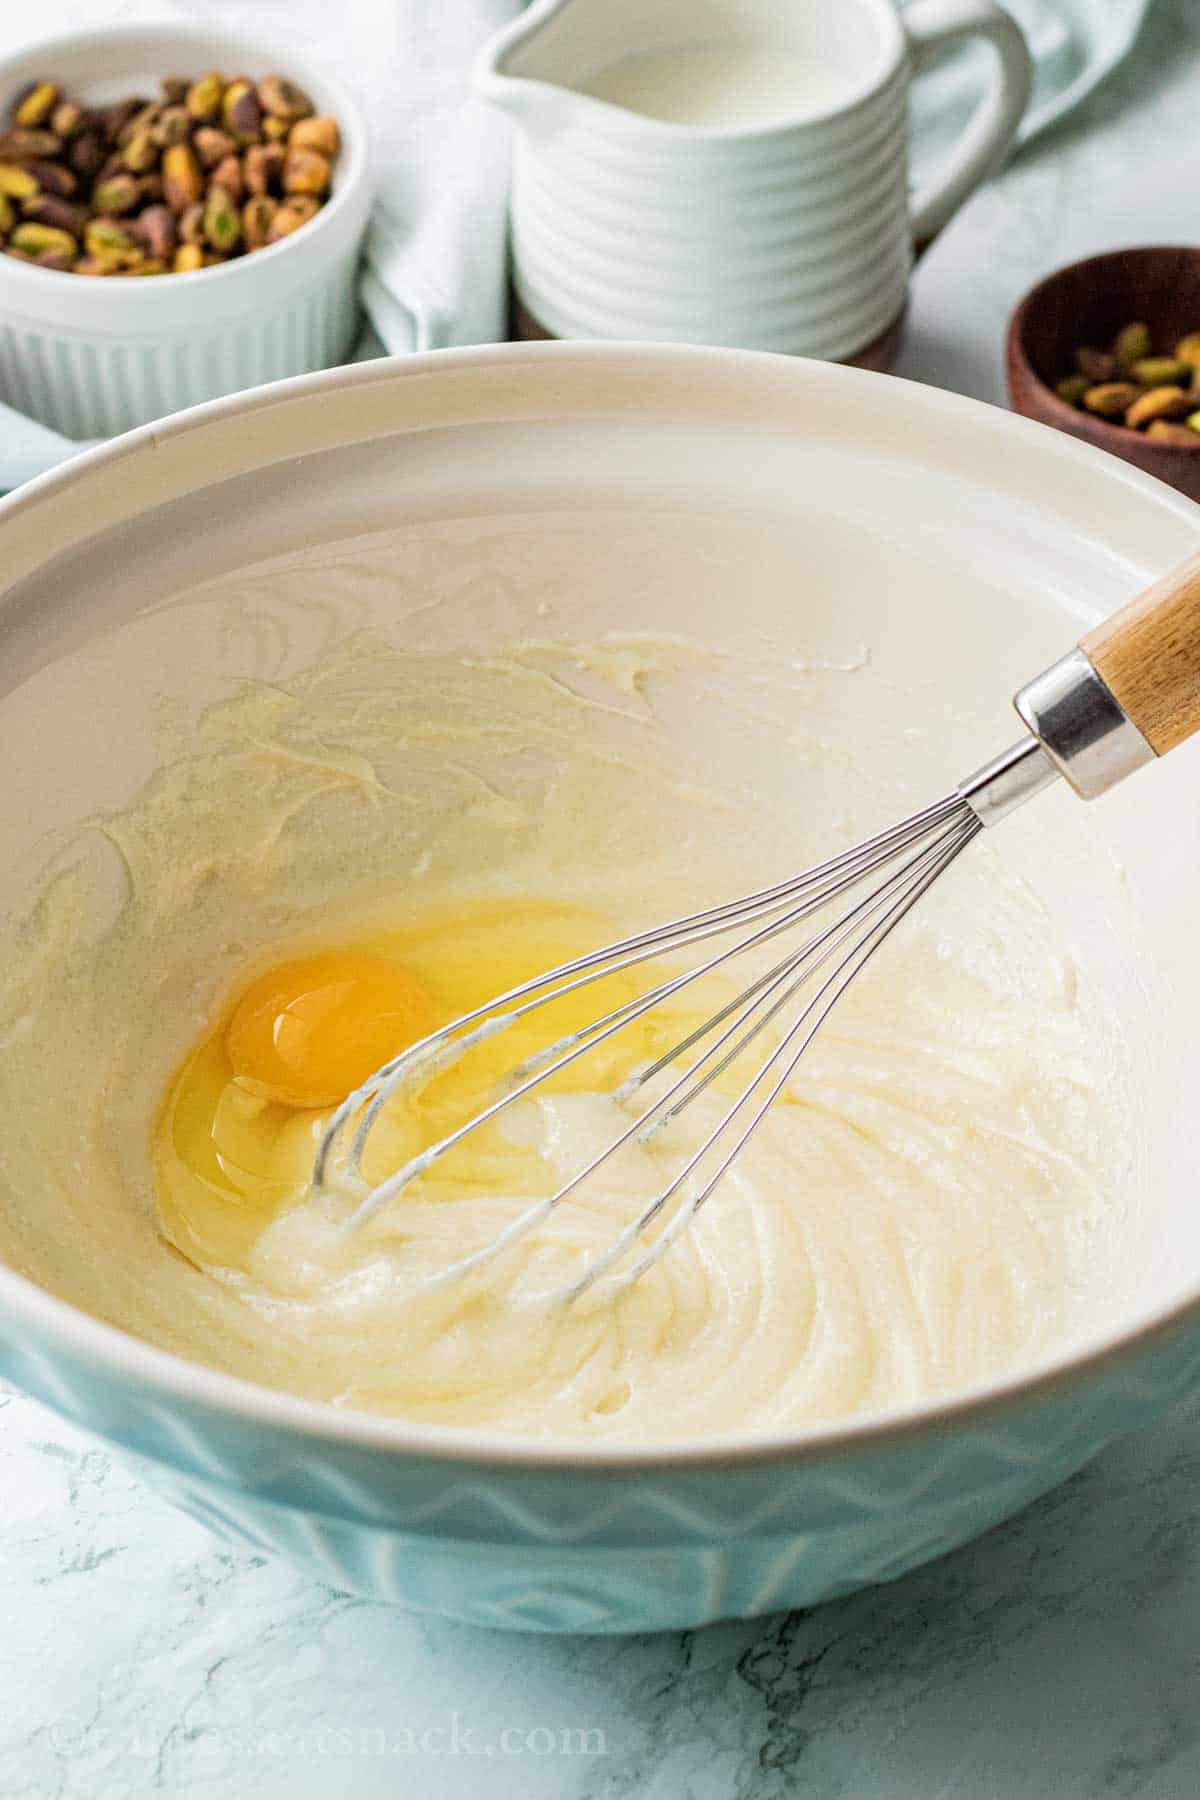 Whisk in blue bowl with egg, cream cheese, and sugar.